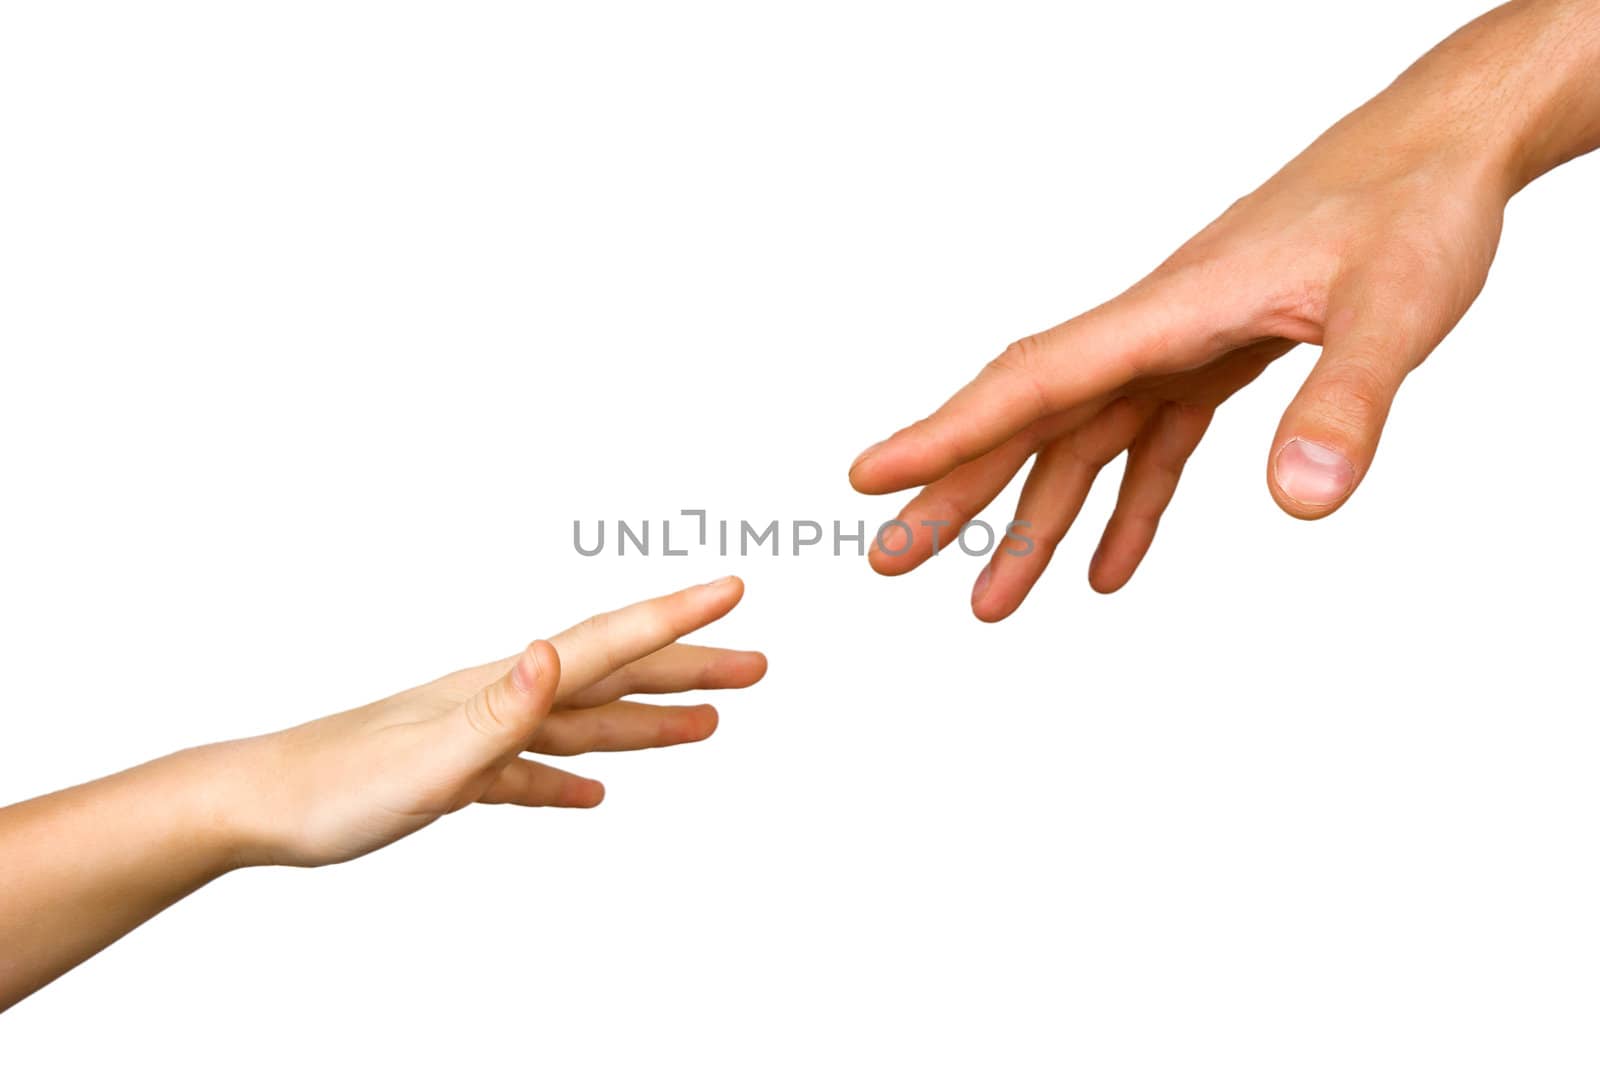 small child's hand reaches for the big hand man isolated on white background